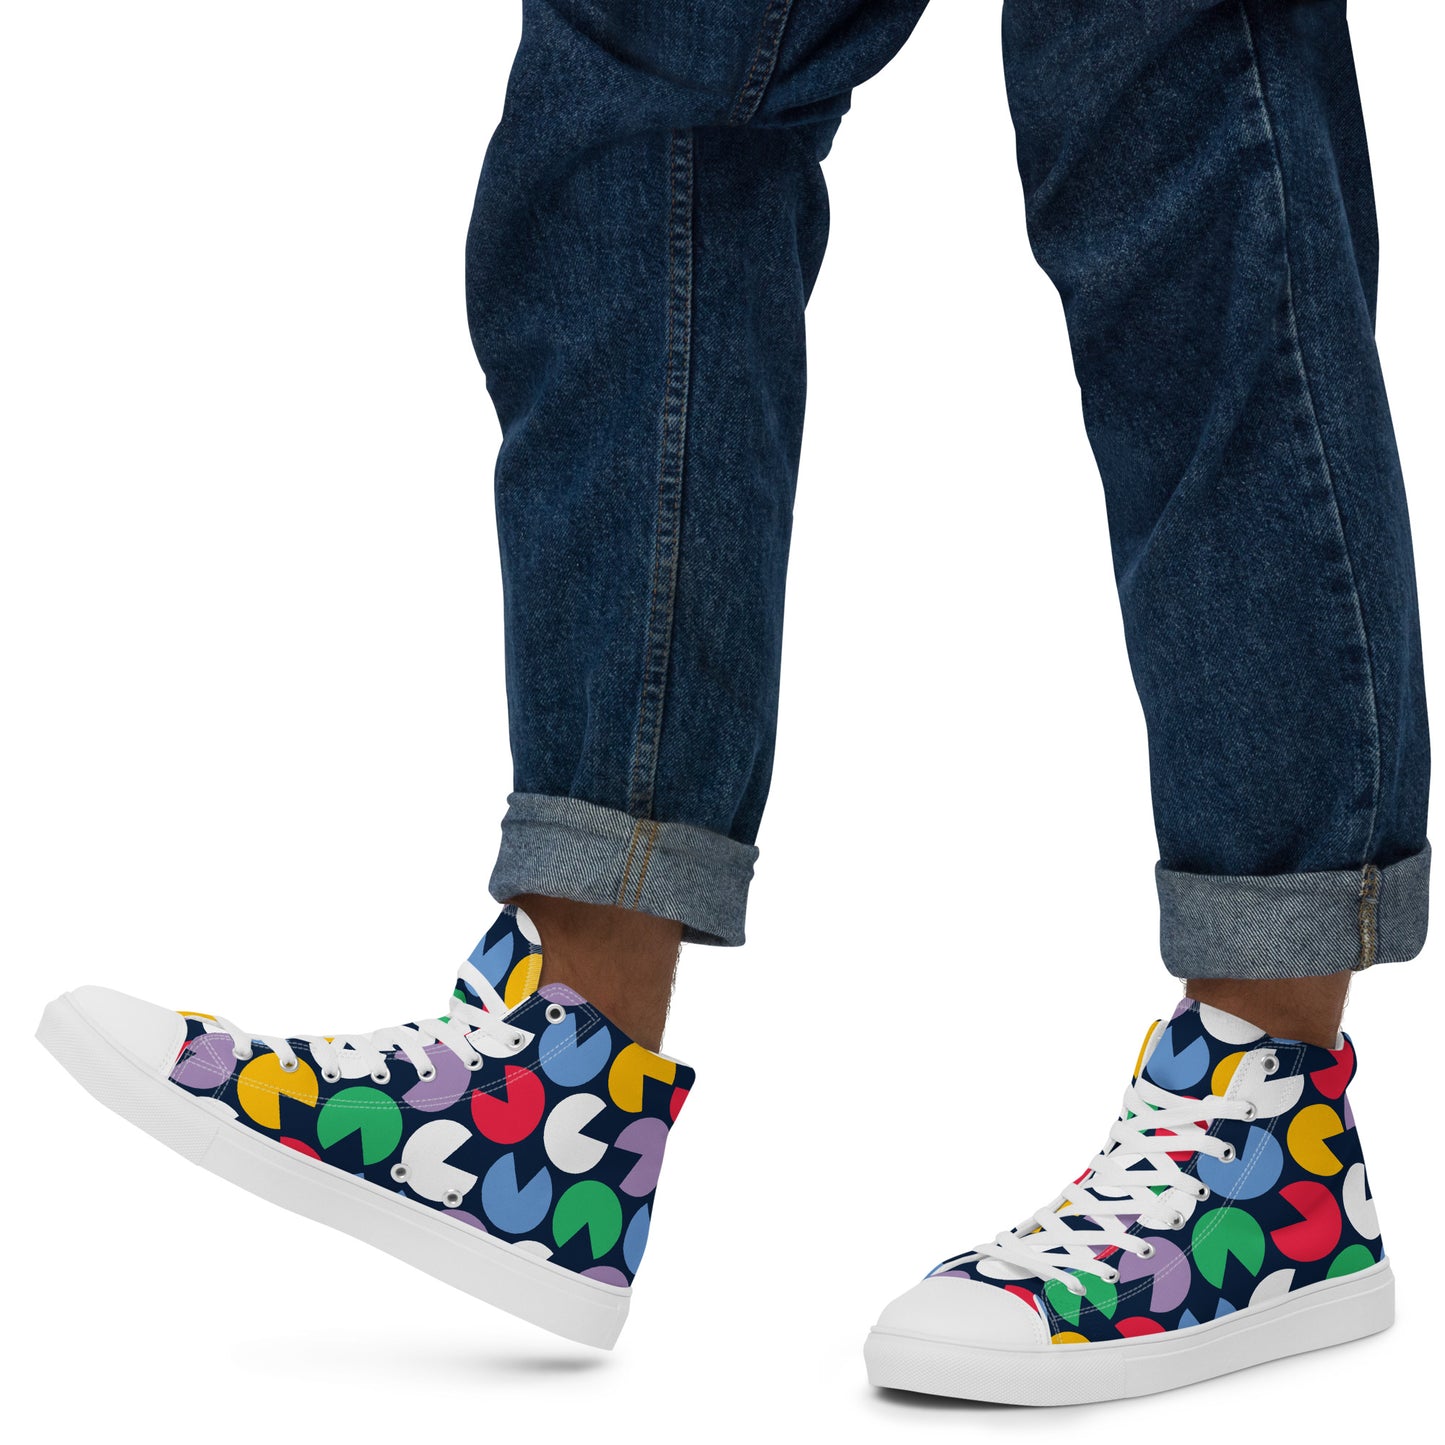 Hungry Circles - Men’s high top canvas shoes Mens High Top Shoes Outside Australia